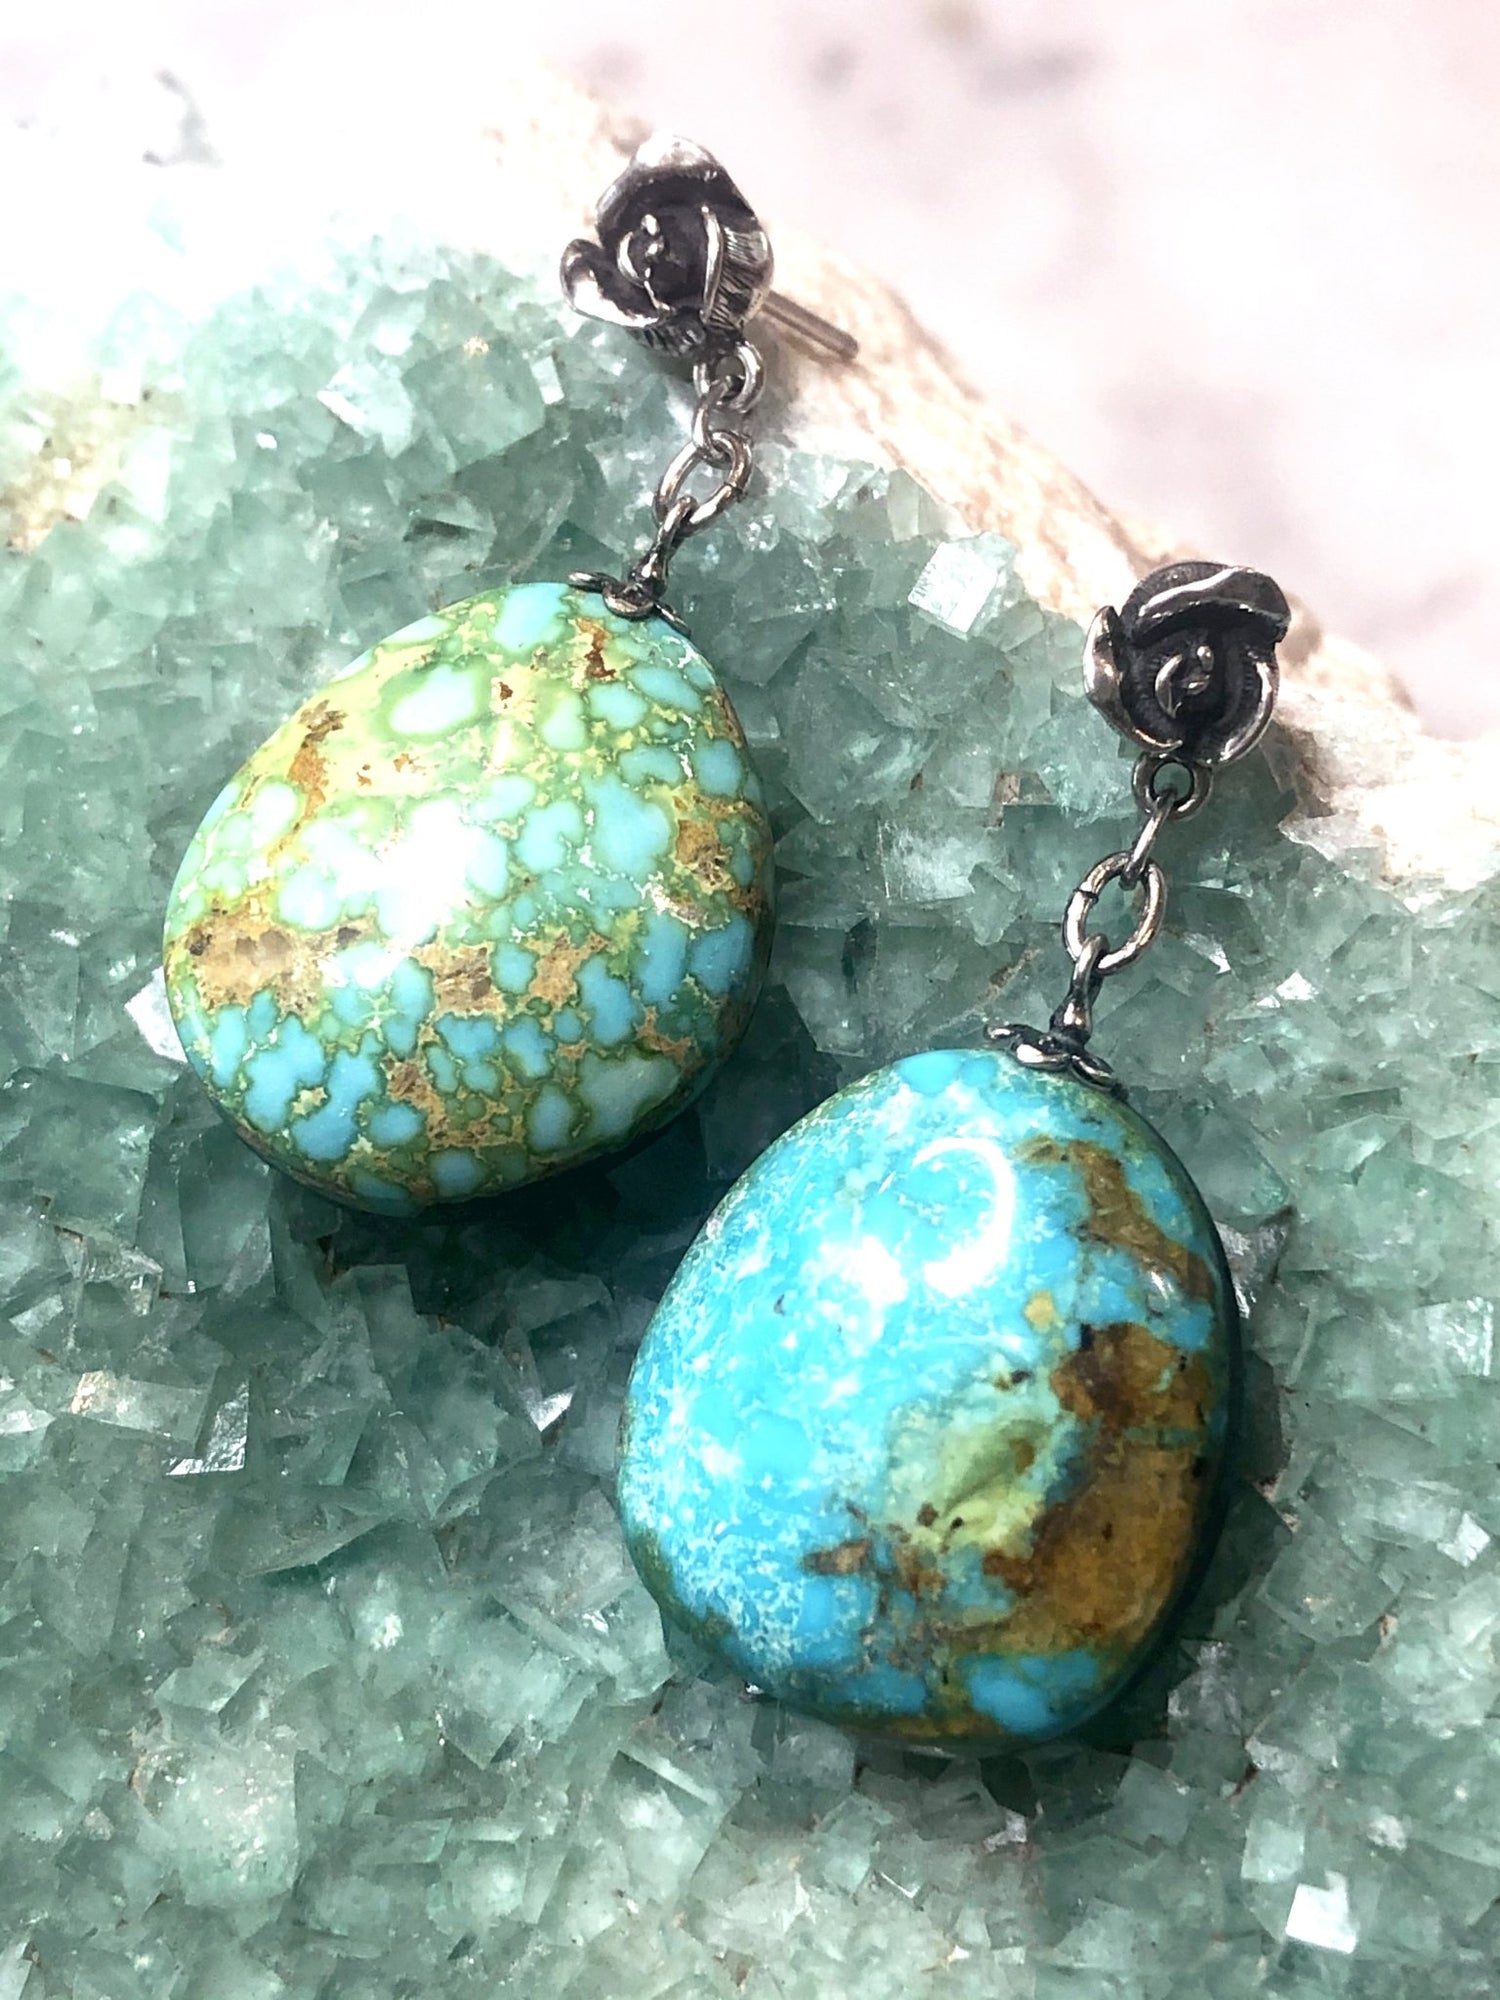 Vintage Arizona Turquoise Drops Earrings with Sterling Silver Rose Posts by Sage Machado - The Sage Lifestyle